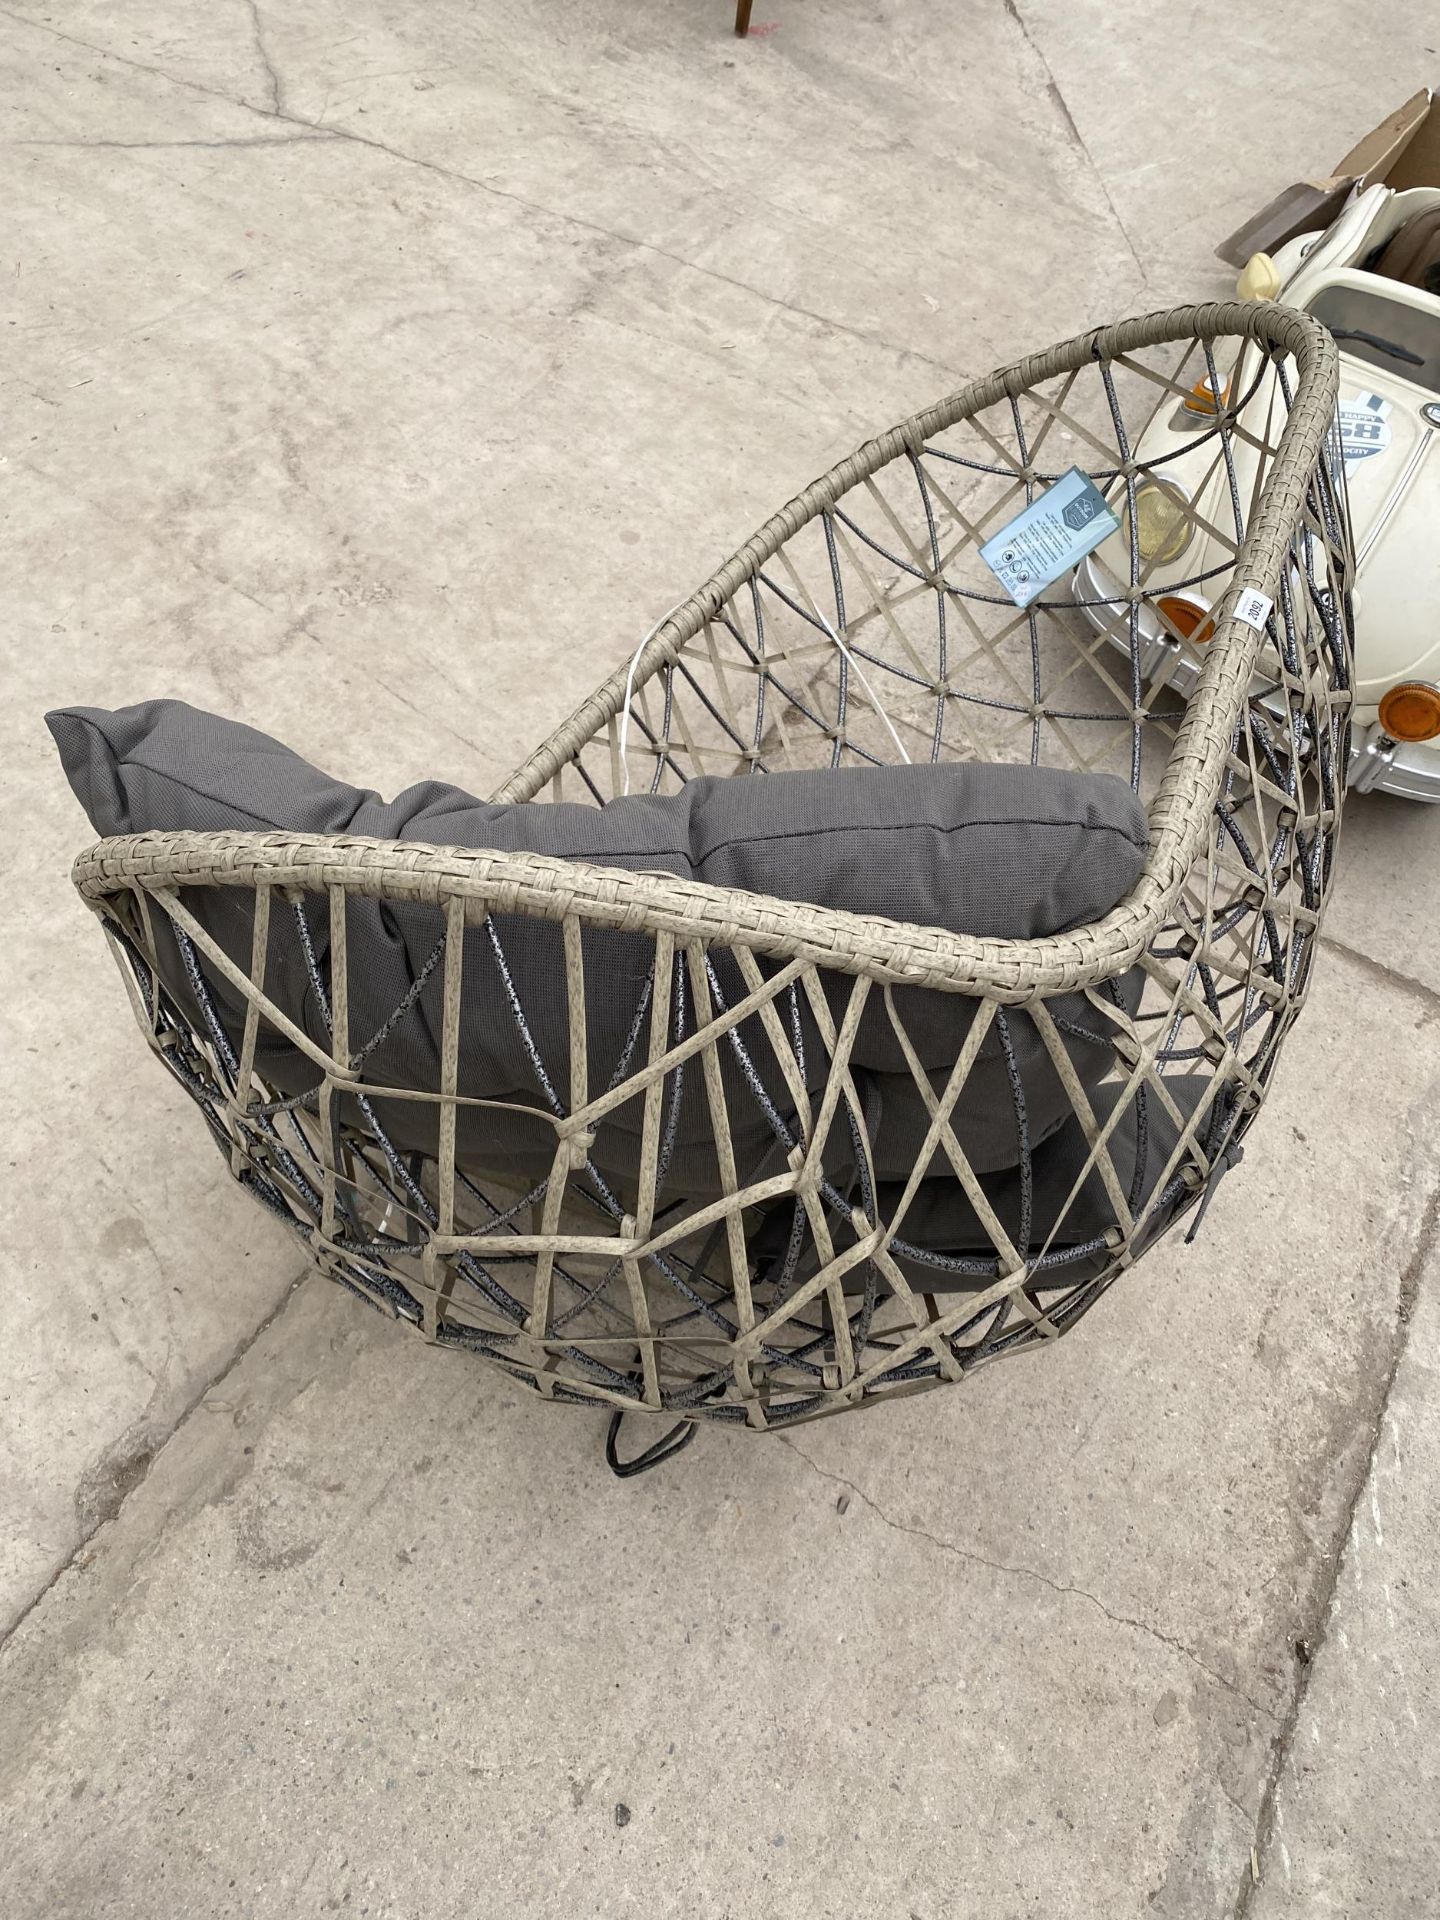 AN OUTDOOR LIVING EGG CHAIR (NO FRAME) - Image 2 of 3